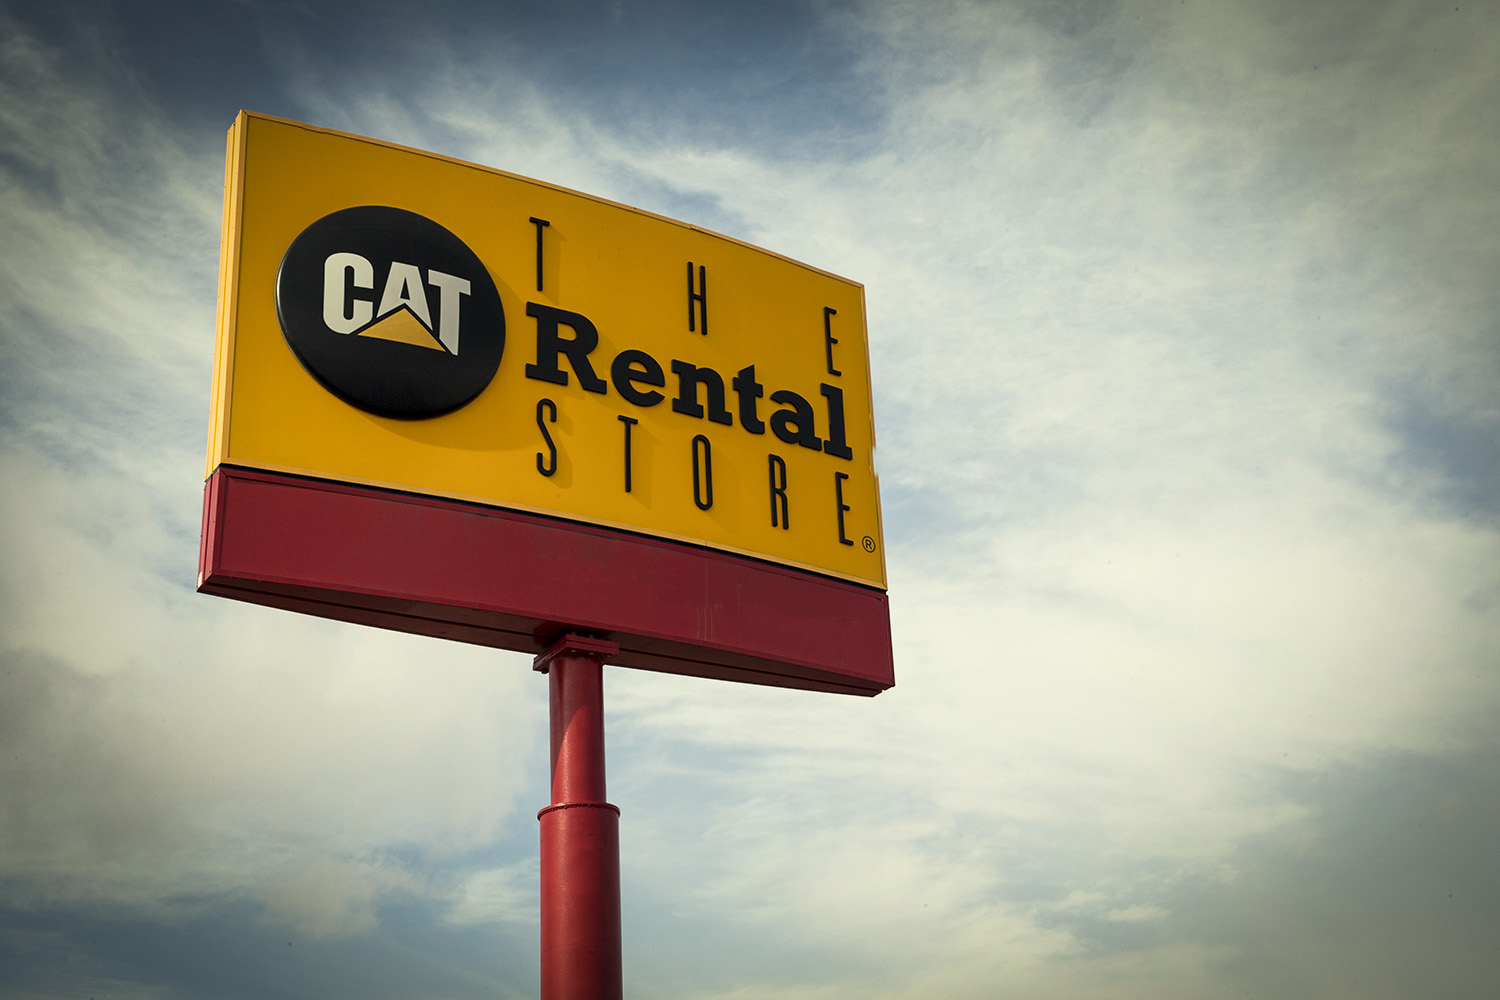 The Cat Rental Store Sign